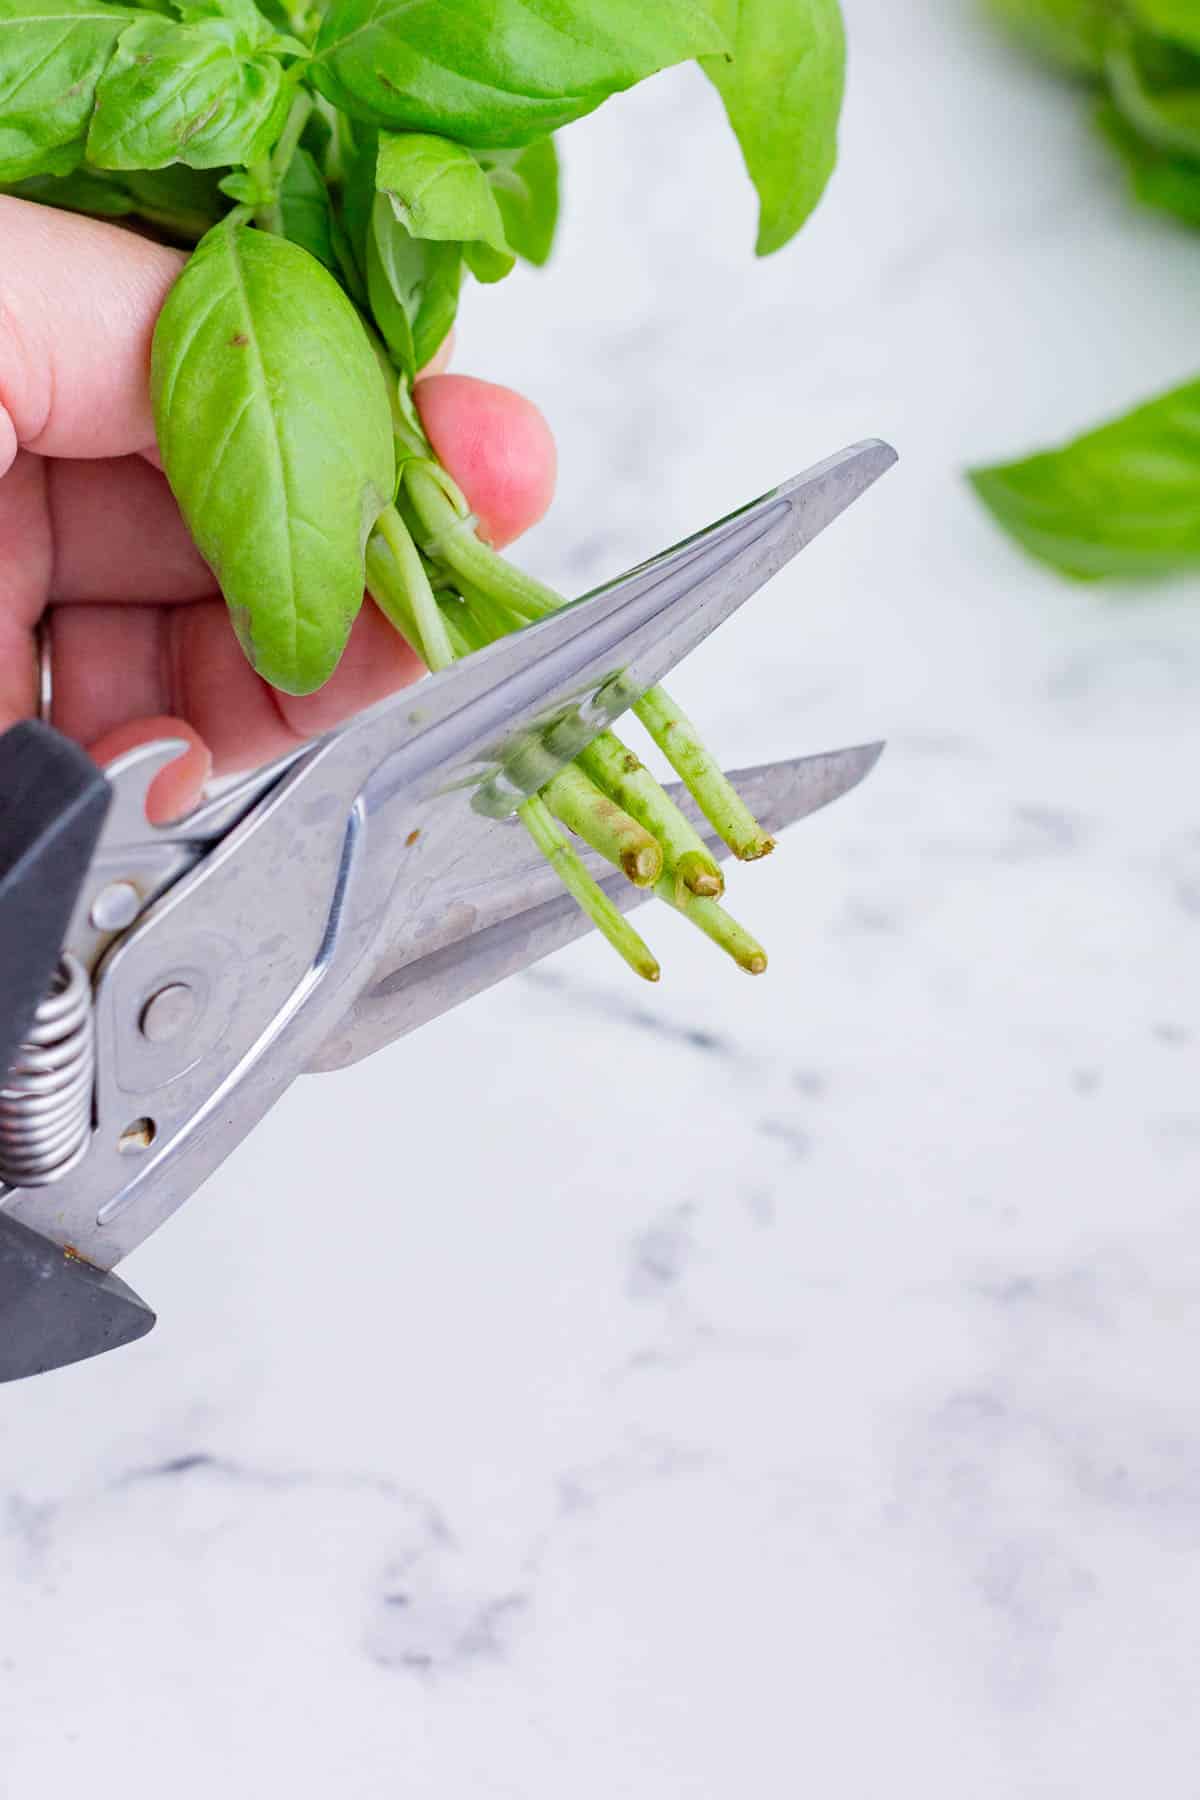 A pair of kitchen scissors cutting the bases of basil leaf stems.